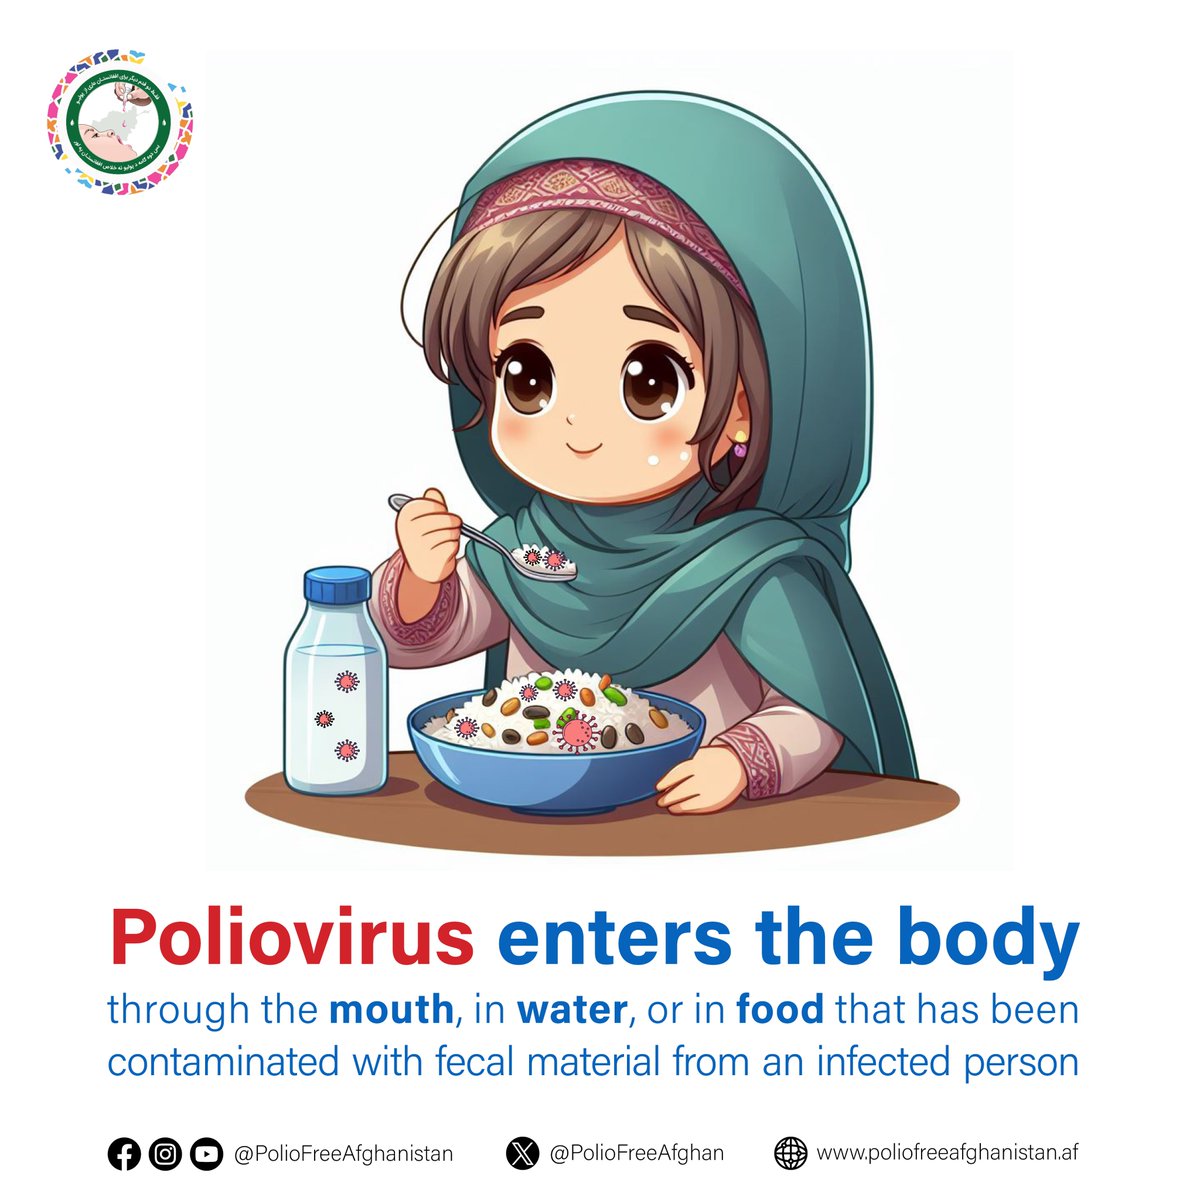 Poliovirus enters the body through the mouth, in water, or in food that has been contaminated with fecal material from an infected person. The vaccine is the only way of preventing children from Polio disease. #EndPolio #VaccinesWork #PolioFreeAfghanistan